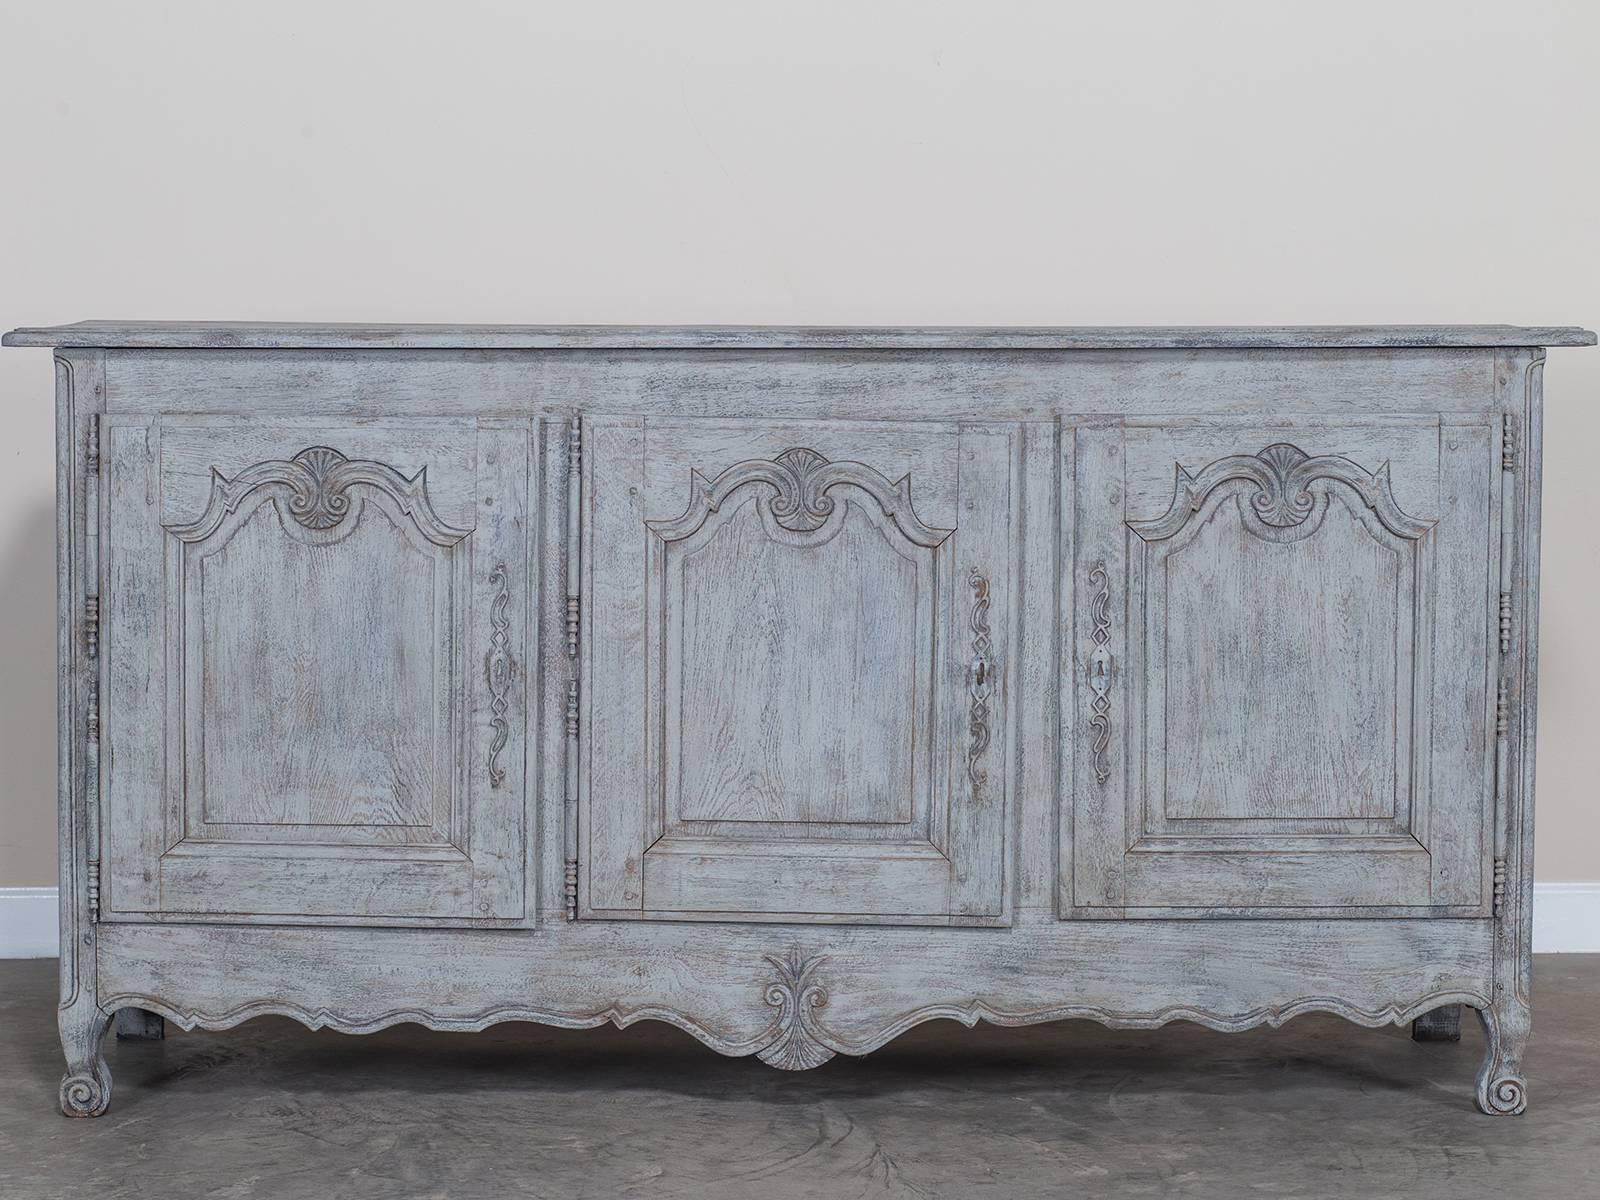 Receive our new selections direct from 1stdibs by email each week. Please click Follow Dealer below and see them first!

A large antique French Louis XV style painted oak buffet/enfilade having three-door and drawers, circa 1850.